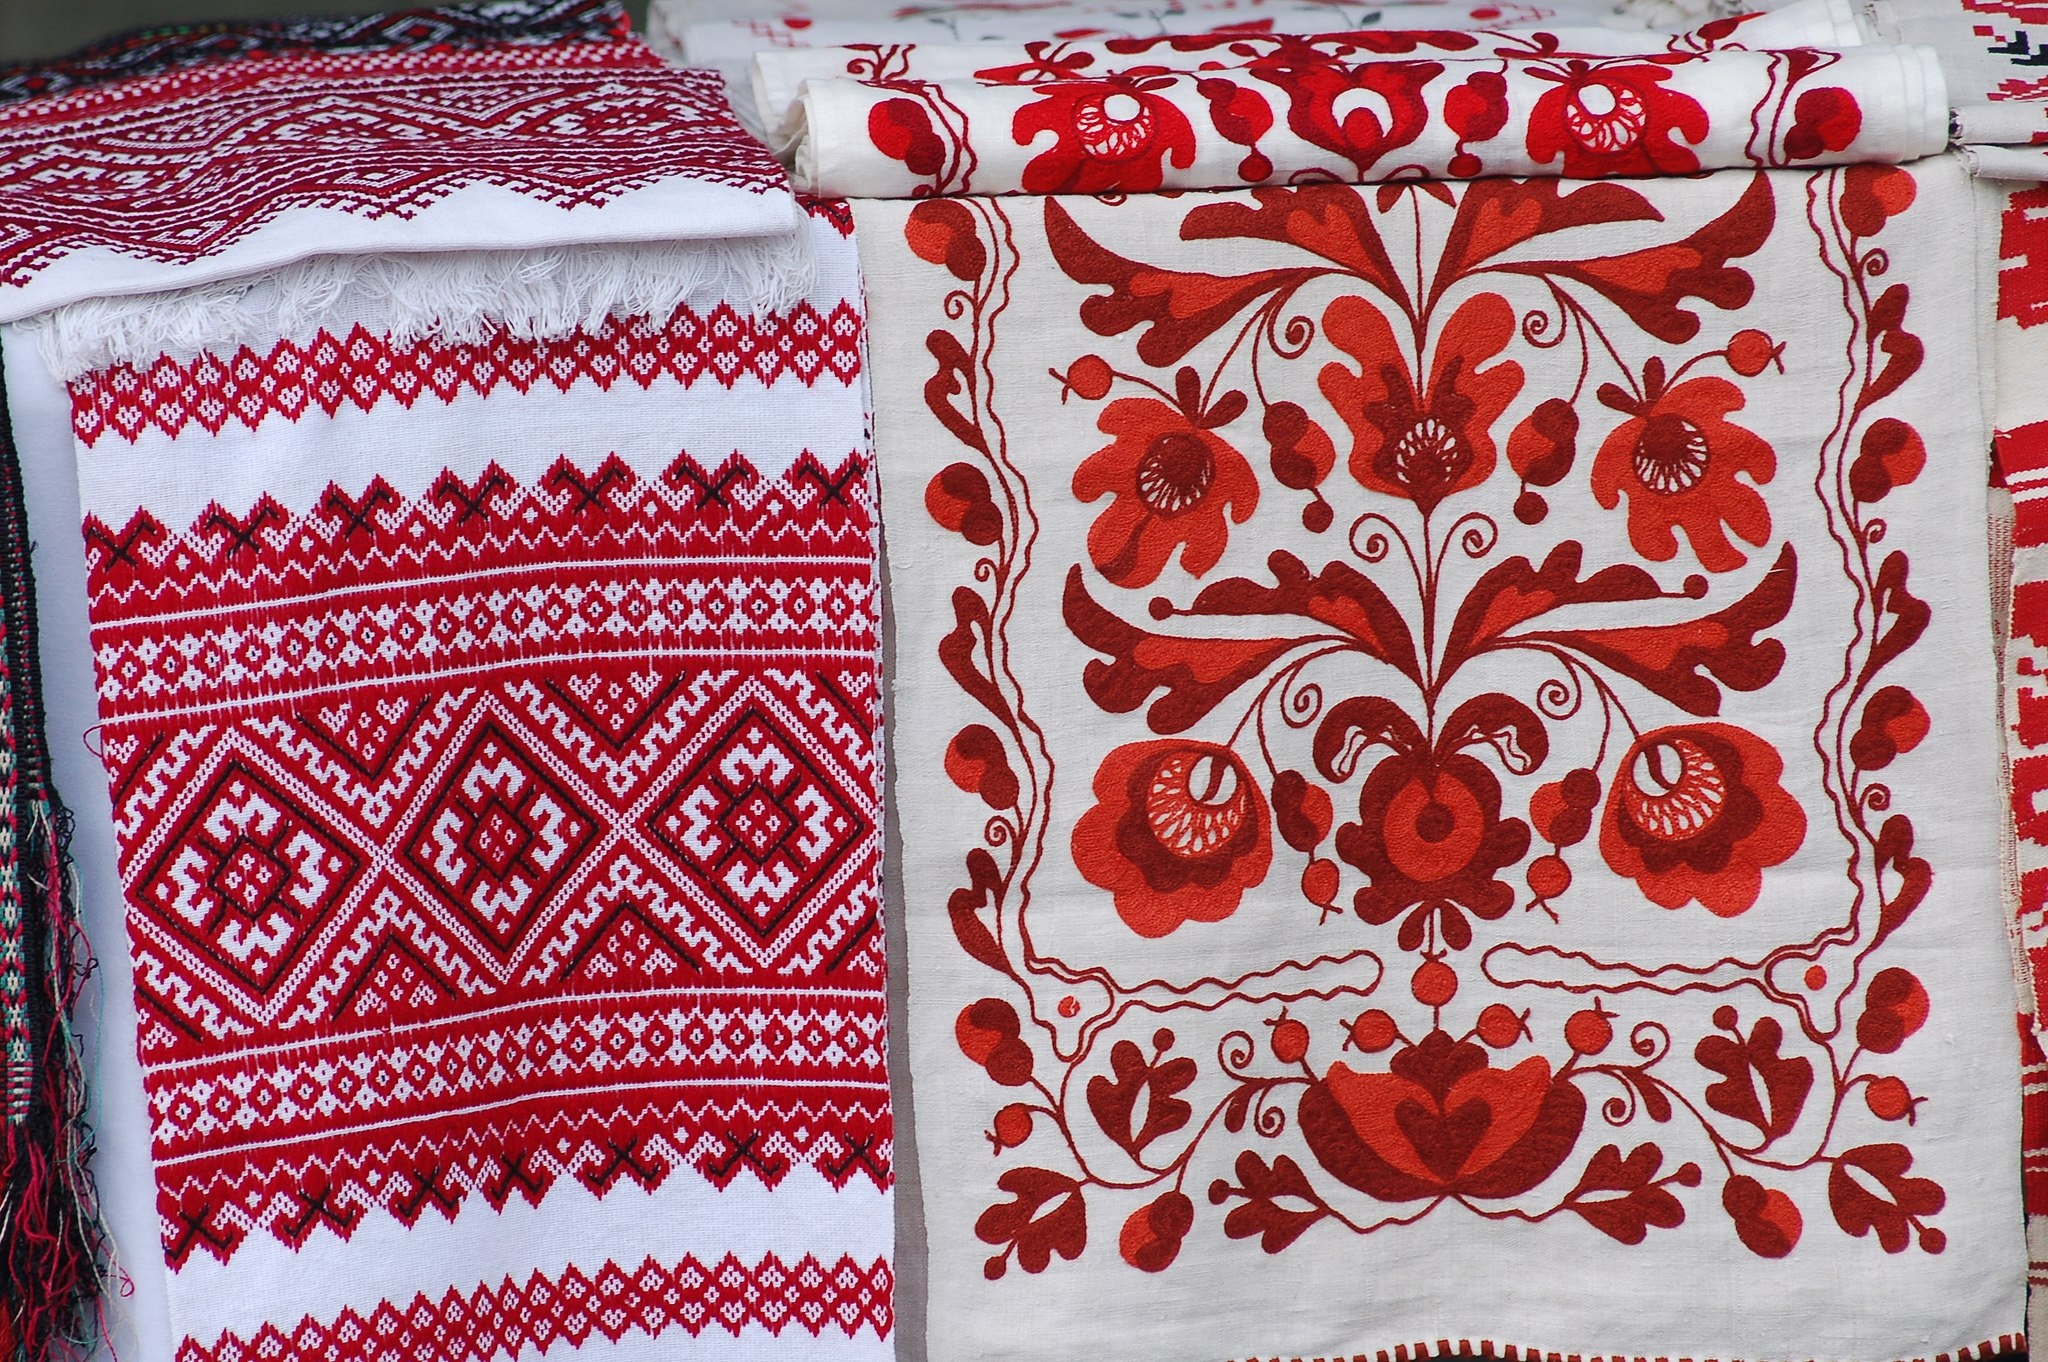 Ukrainian Embroidery Patterns The Meaning Behind Traditional Patterns In Ukrainian Embroidery